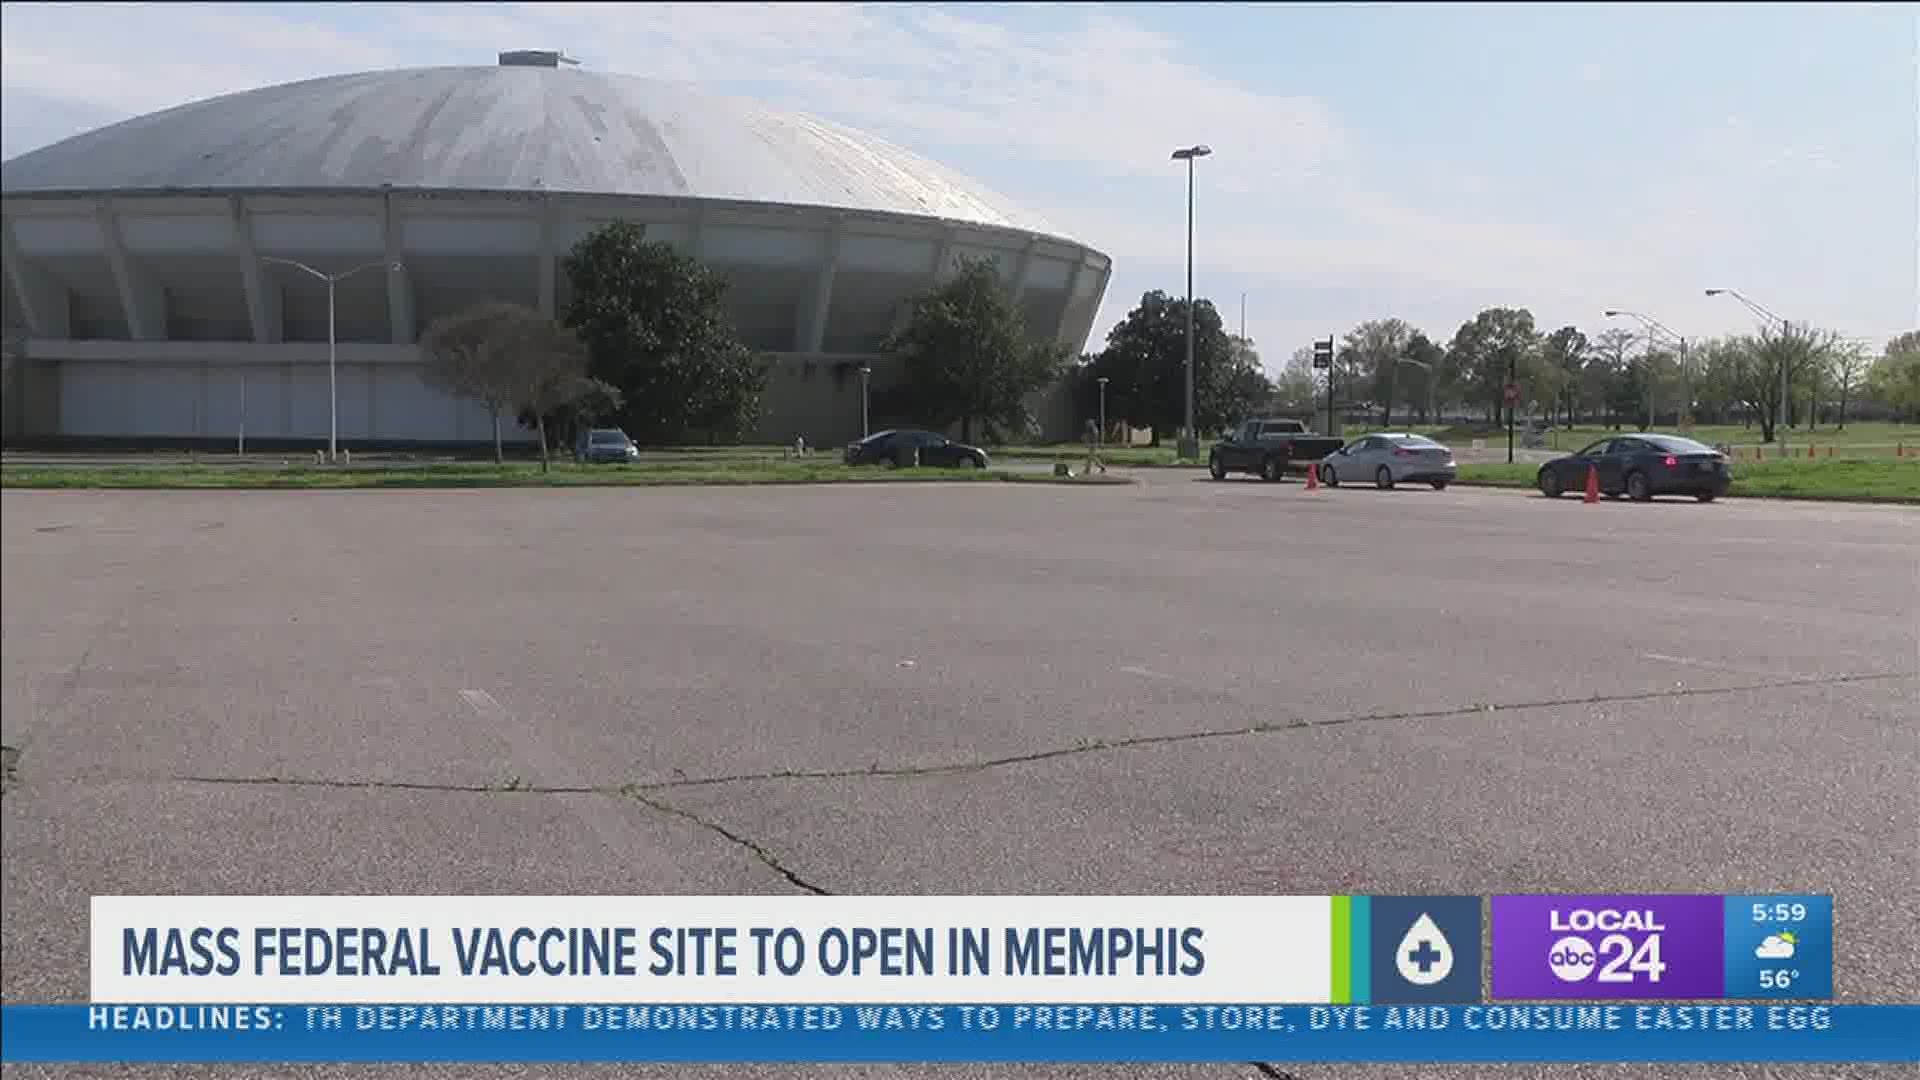 Starting next week, as many as 21,000 additional weekly doses are expected from federal teams at the Pipkin Building in midtown Memphis.